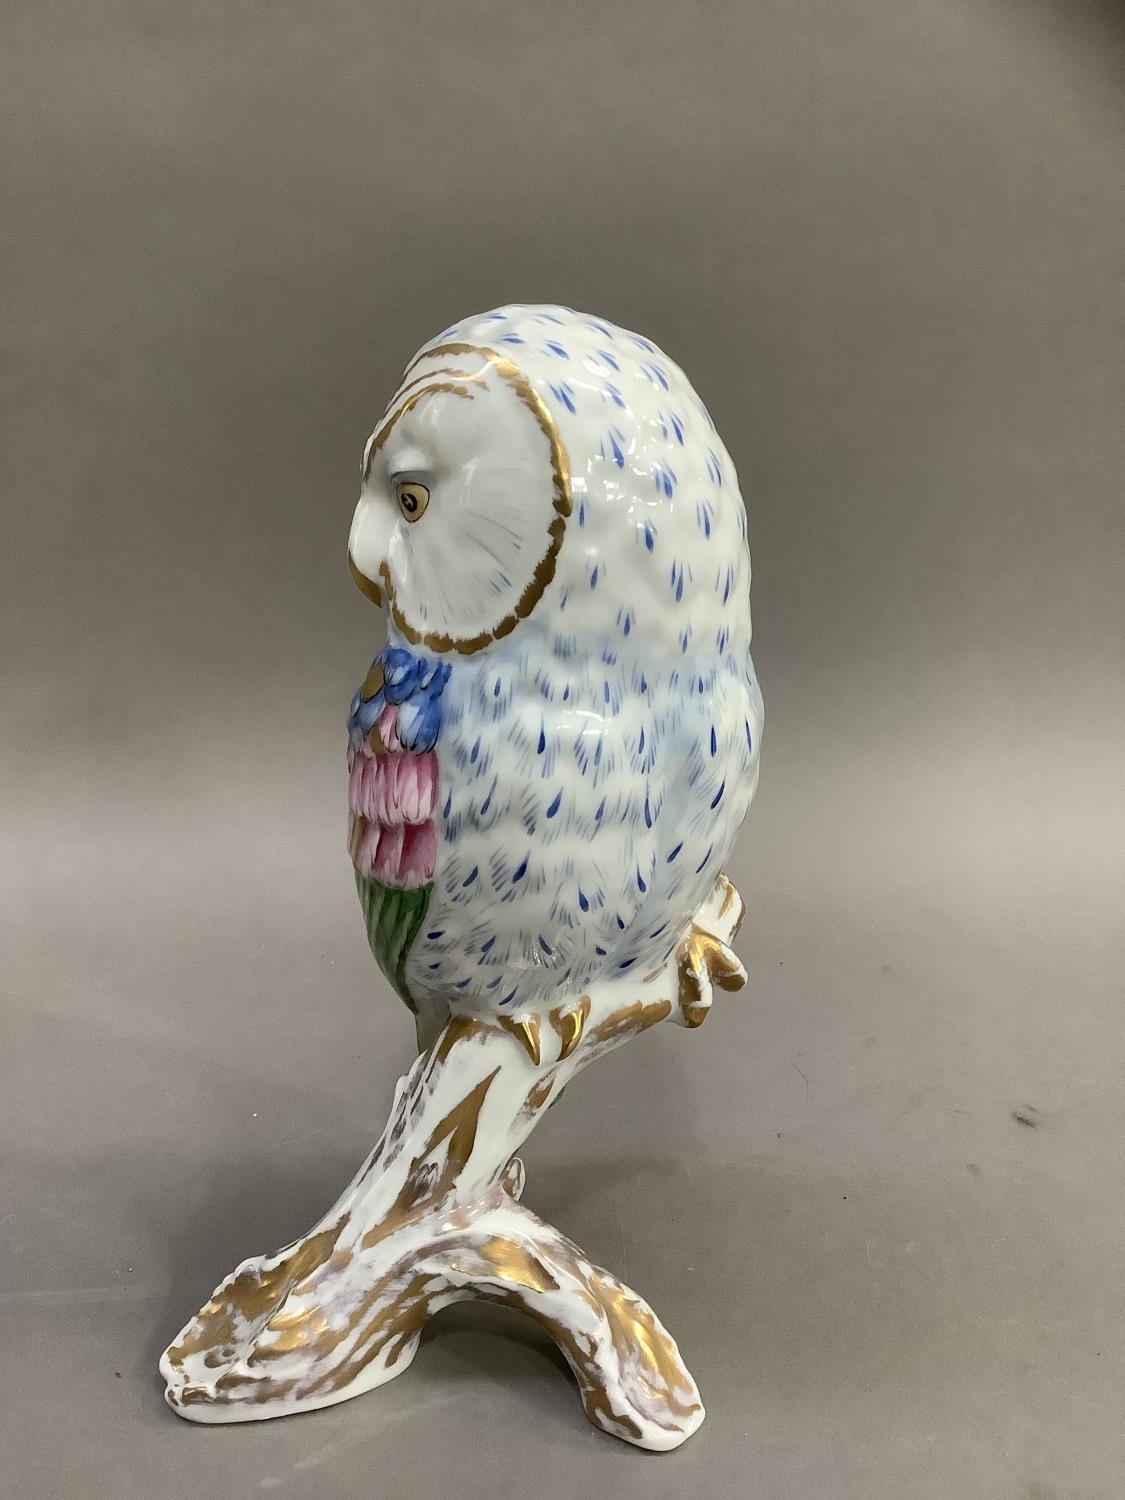 A Herend style china figure of an owl perched on a branch by Vista Alegre, Portugal, painted by hand - Image 3 of 6